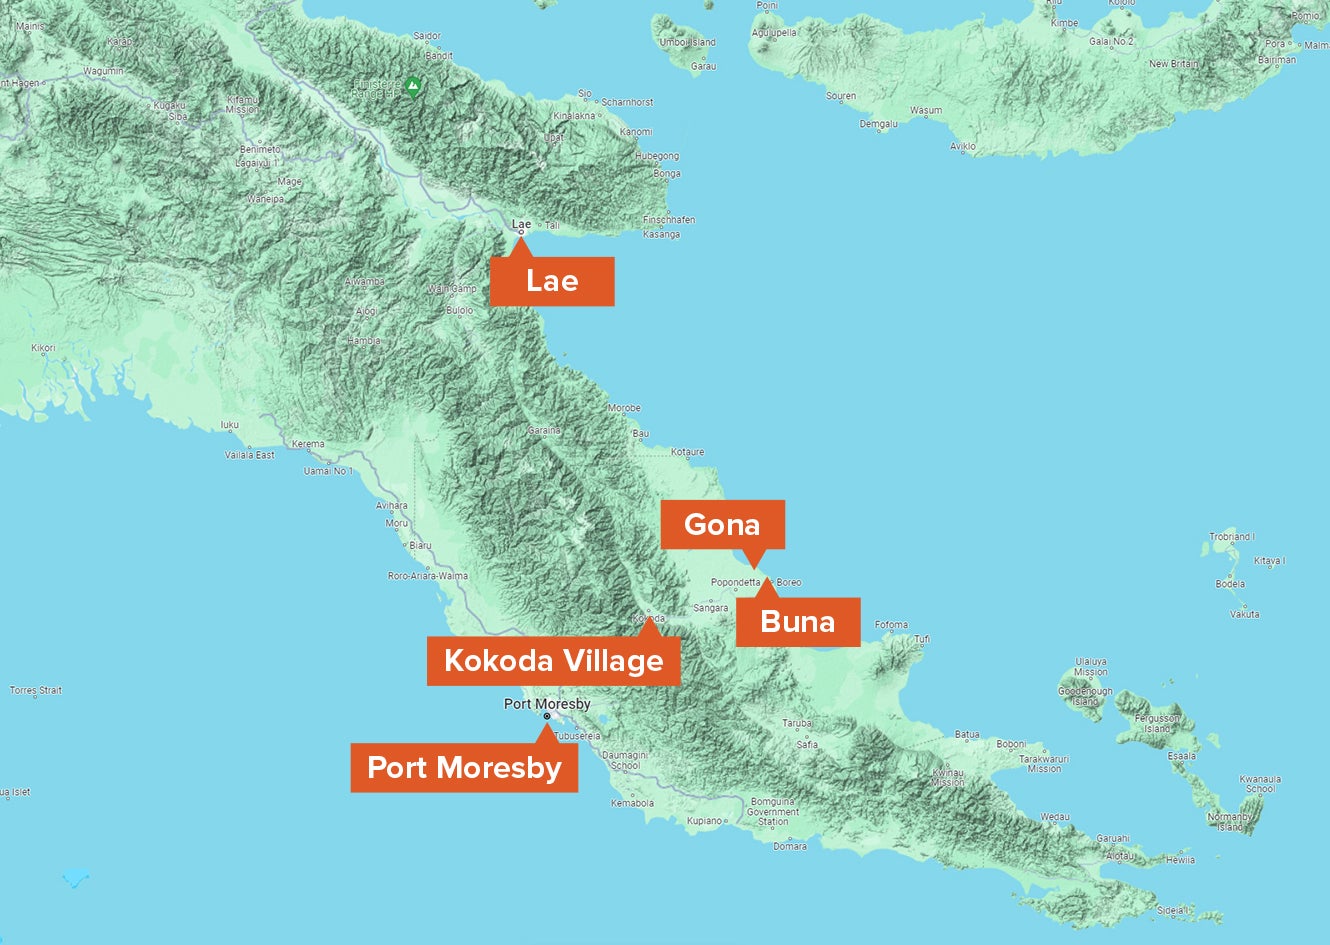 Geographic map of the southwestern tip of New Guinea island showing key towns